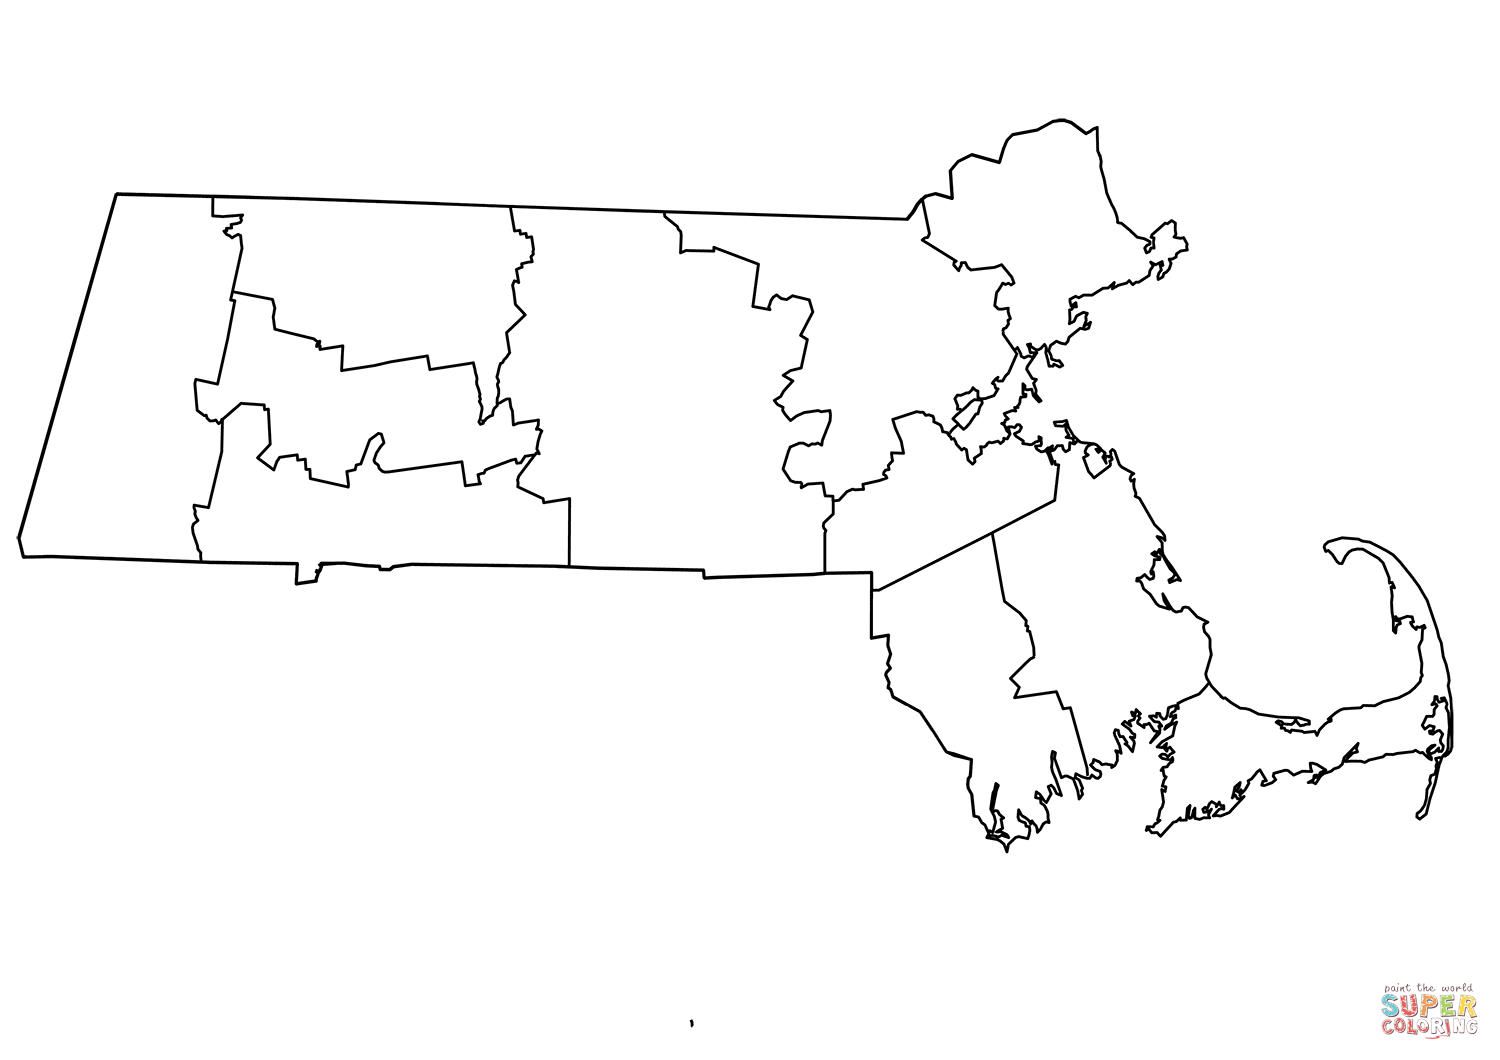 Outline map of massachusetts counties coloring page free printable coloring pages